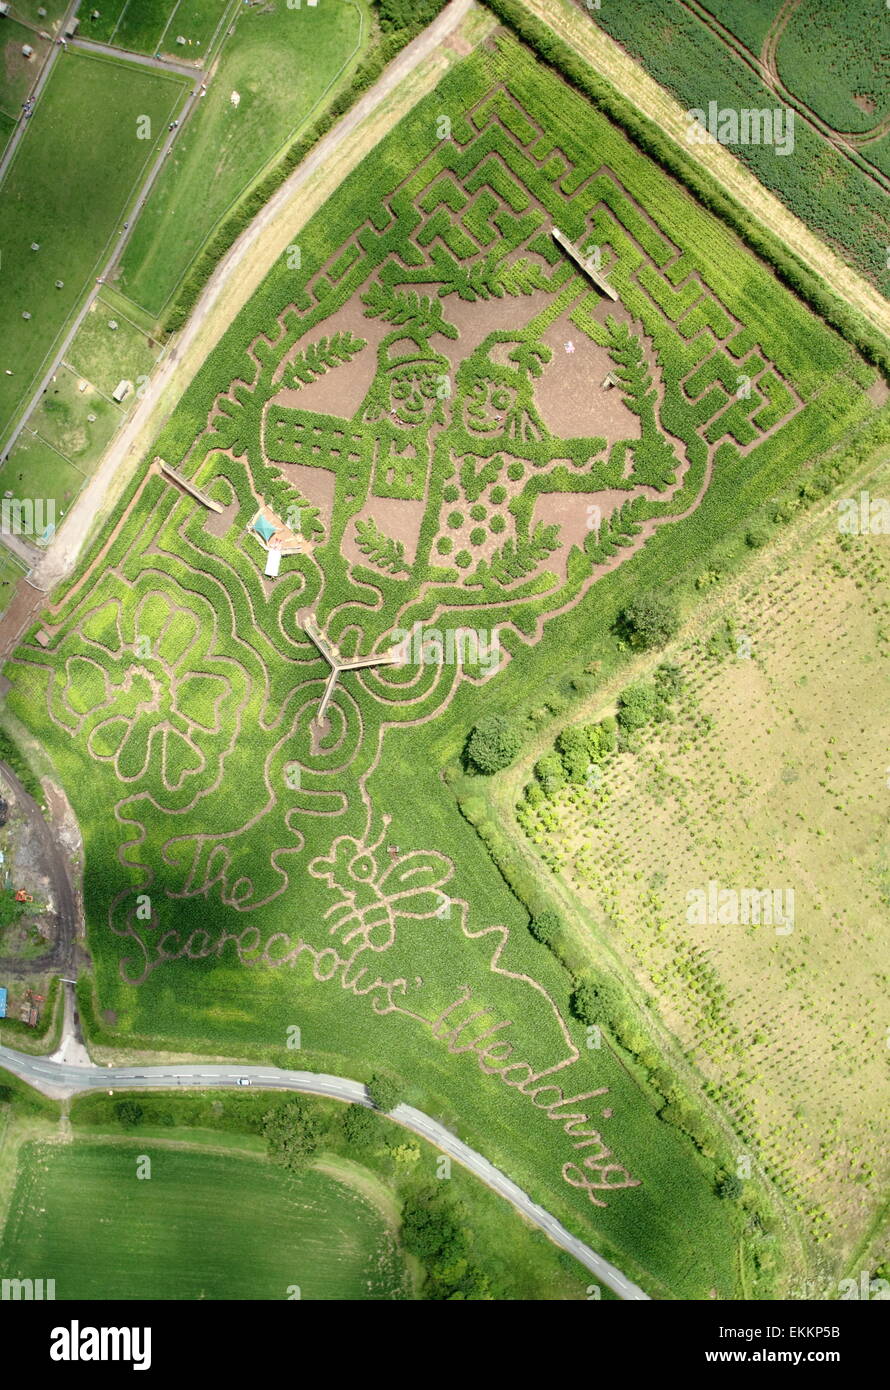 Maize maze celebrating the launch of Julia Donaldson's book 'The Scarecrows' Wedding, Staffordshire, UK - aerial shot Stock Photo